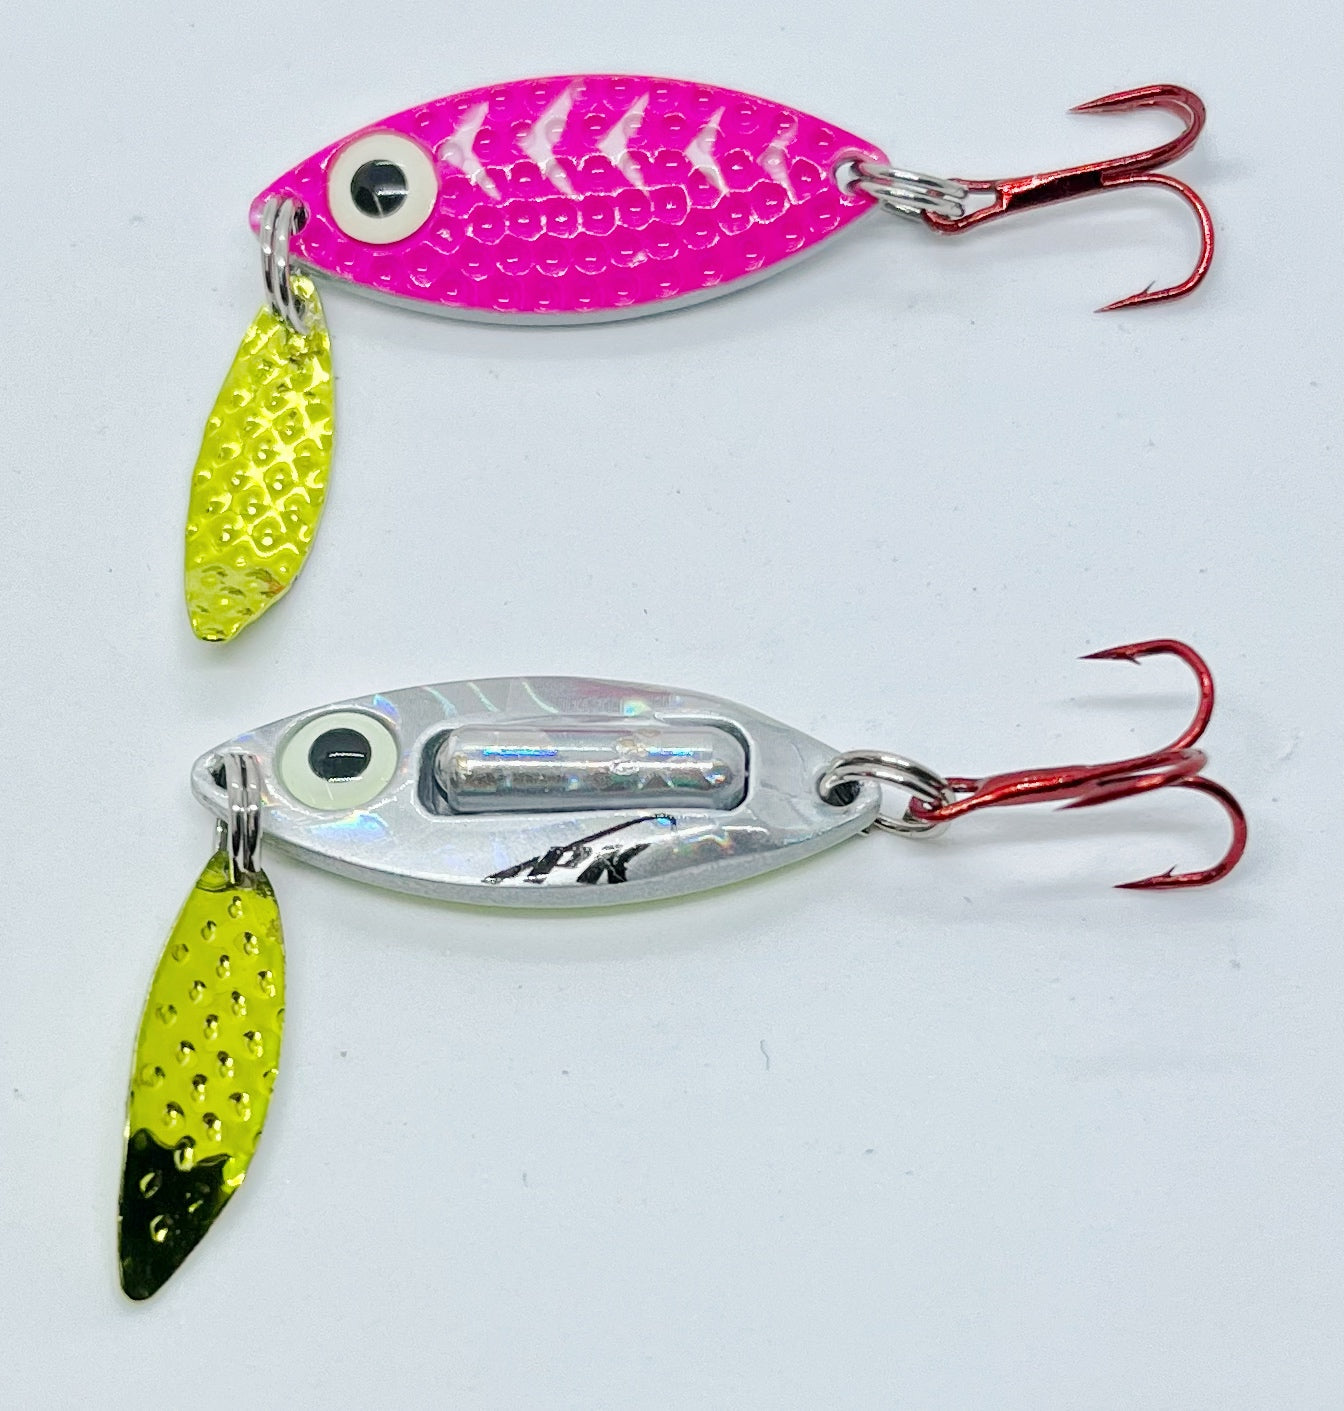 The new Rapala Harmaja spoon made for pike. All of the colours this spoon  comes in look great. I can't wait to try it out in the spring. :  r/Fishing_Gear